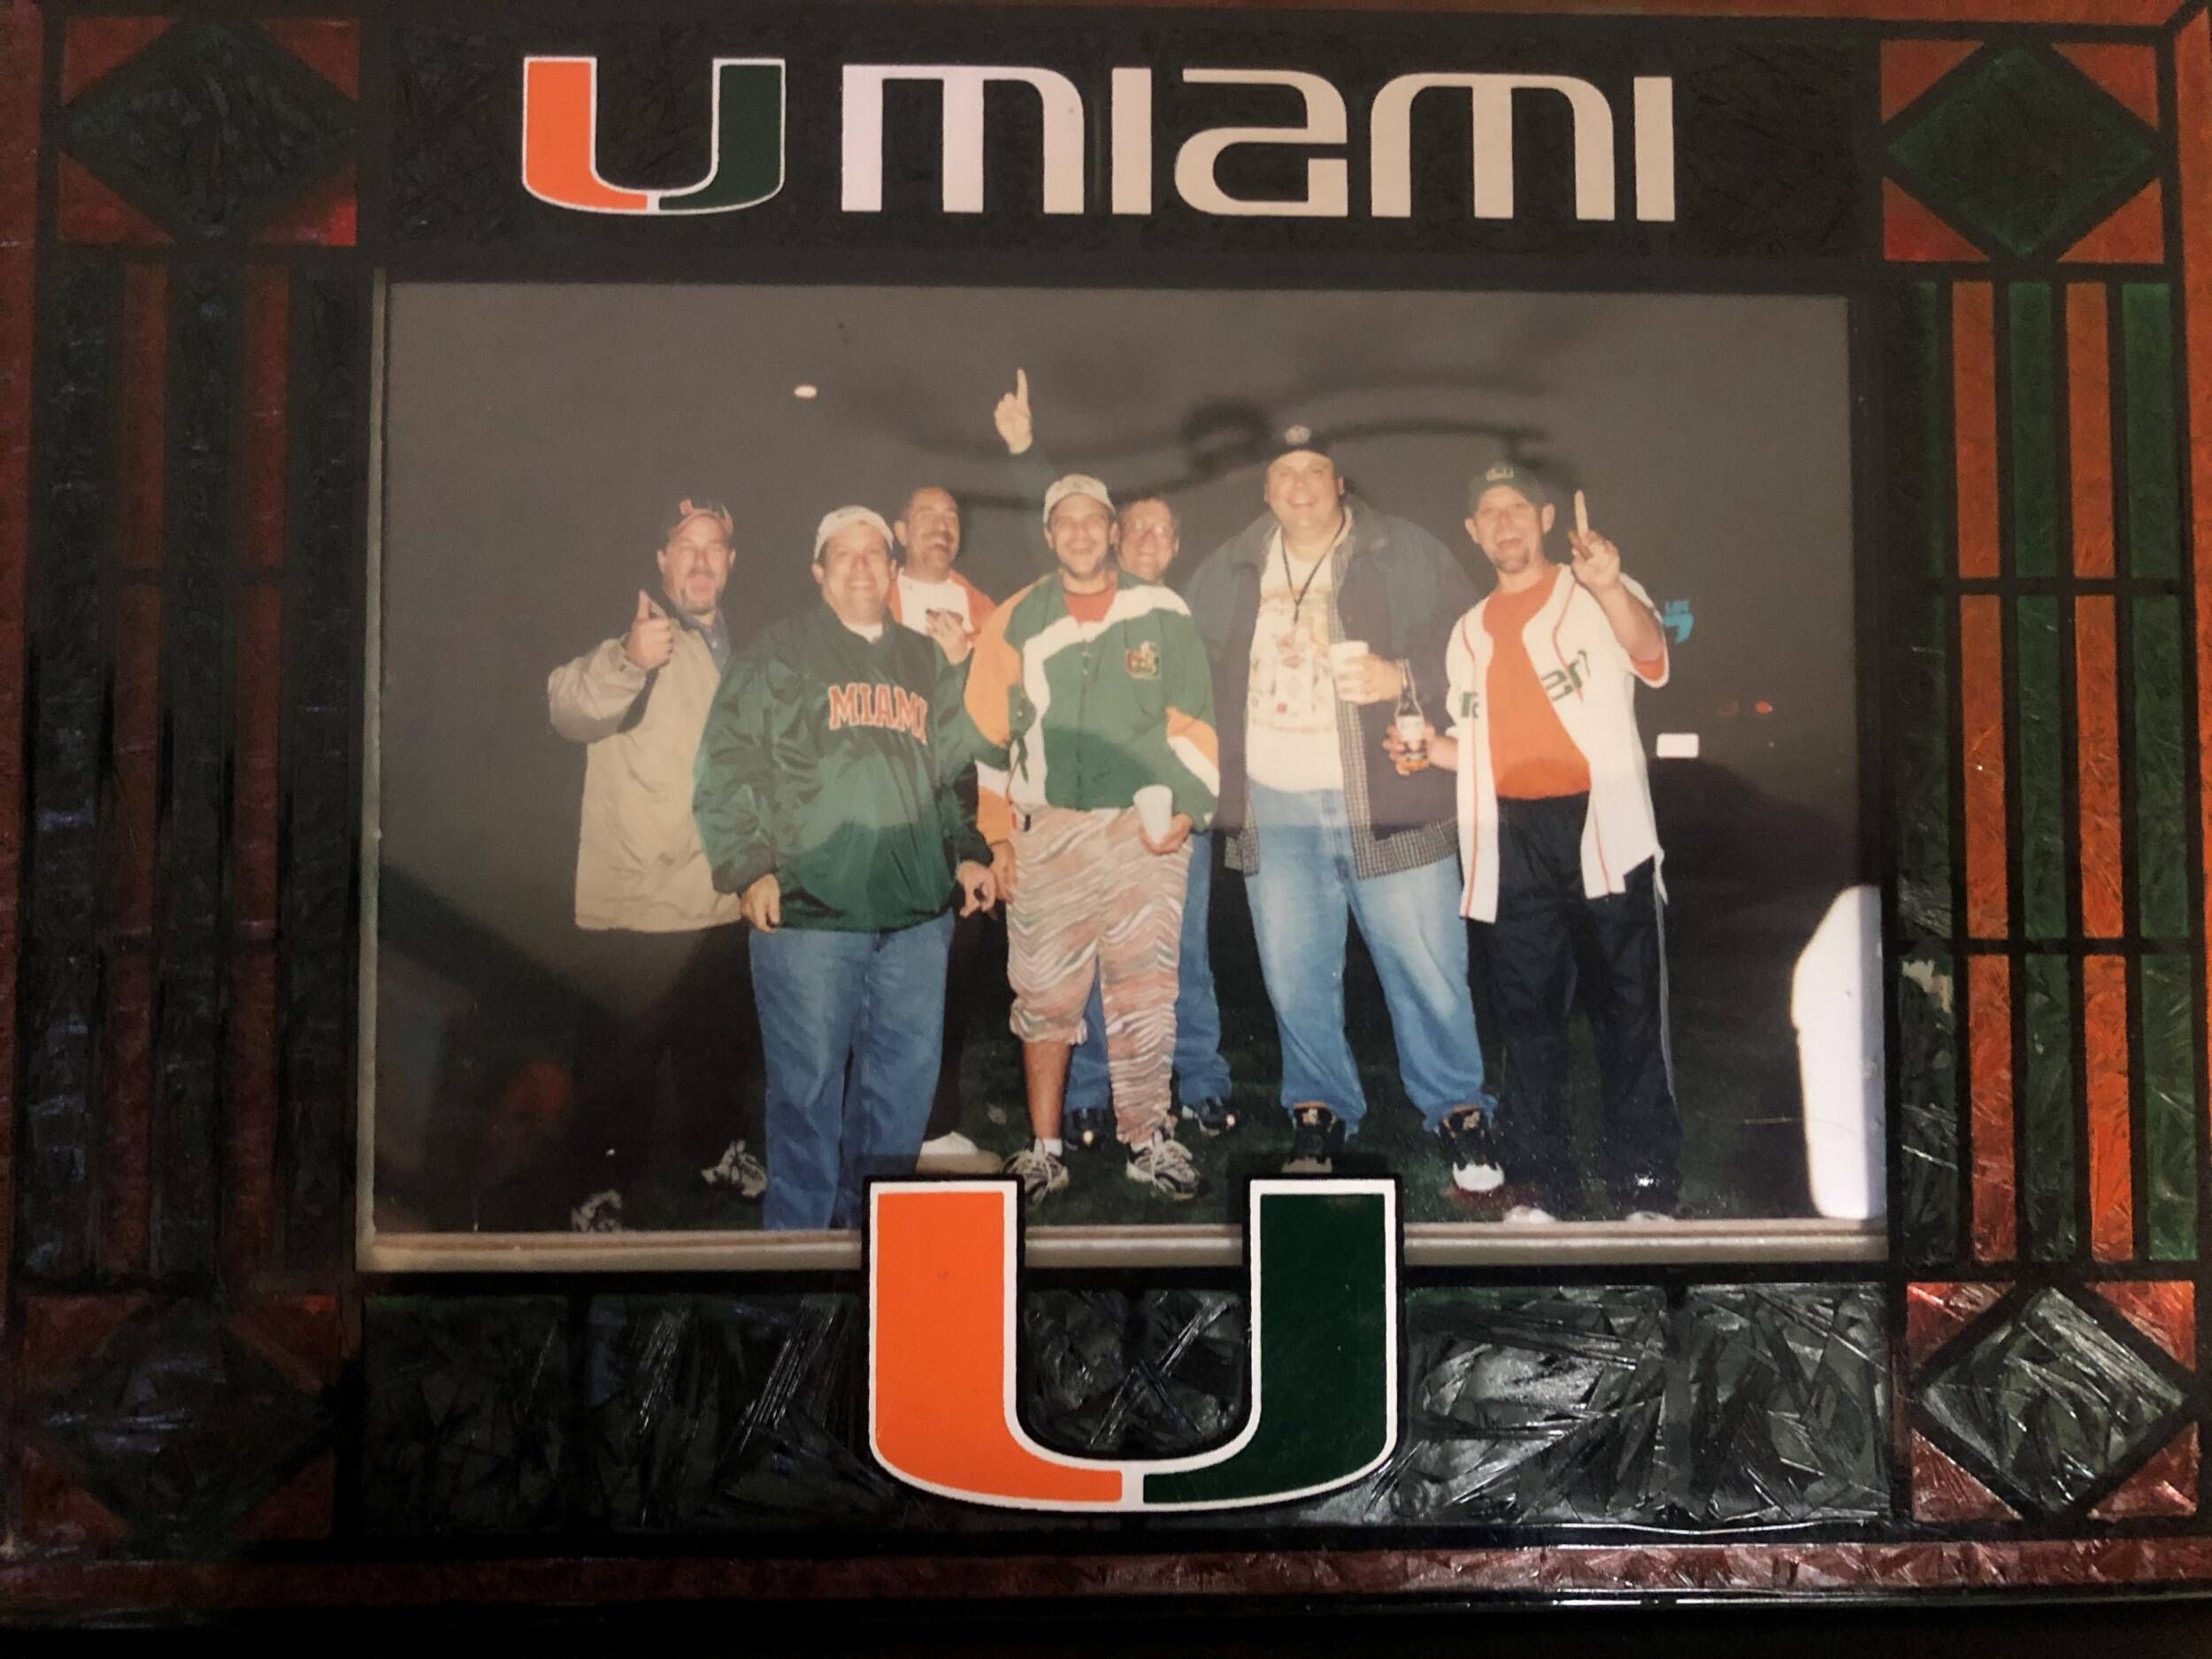 Seasoned Canes: Fans Share Their Stories – University of Miami Athletics